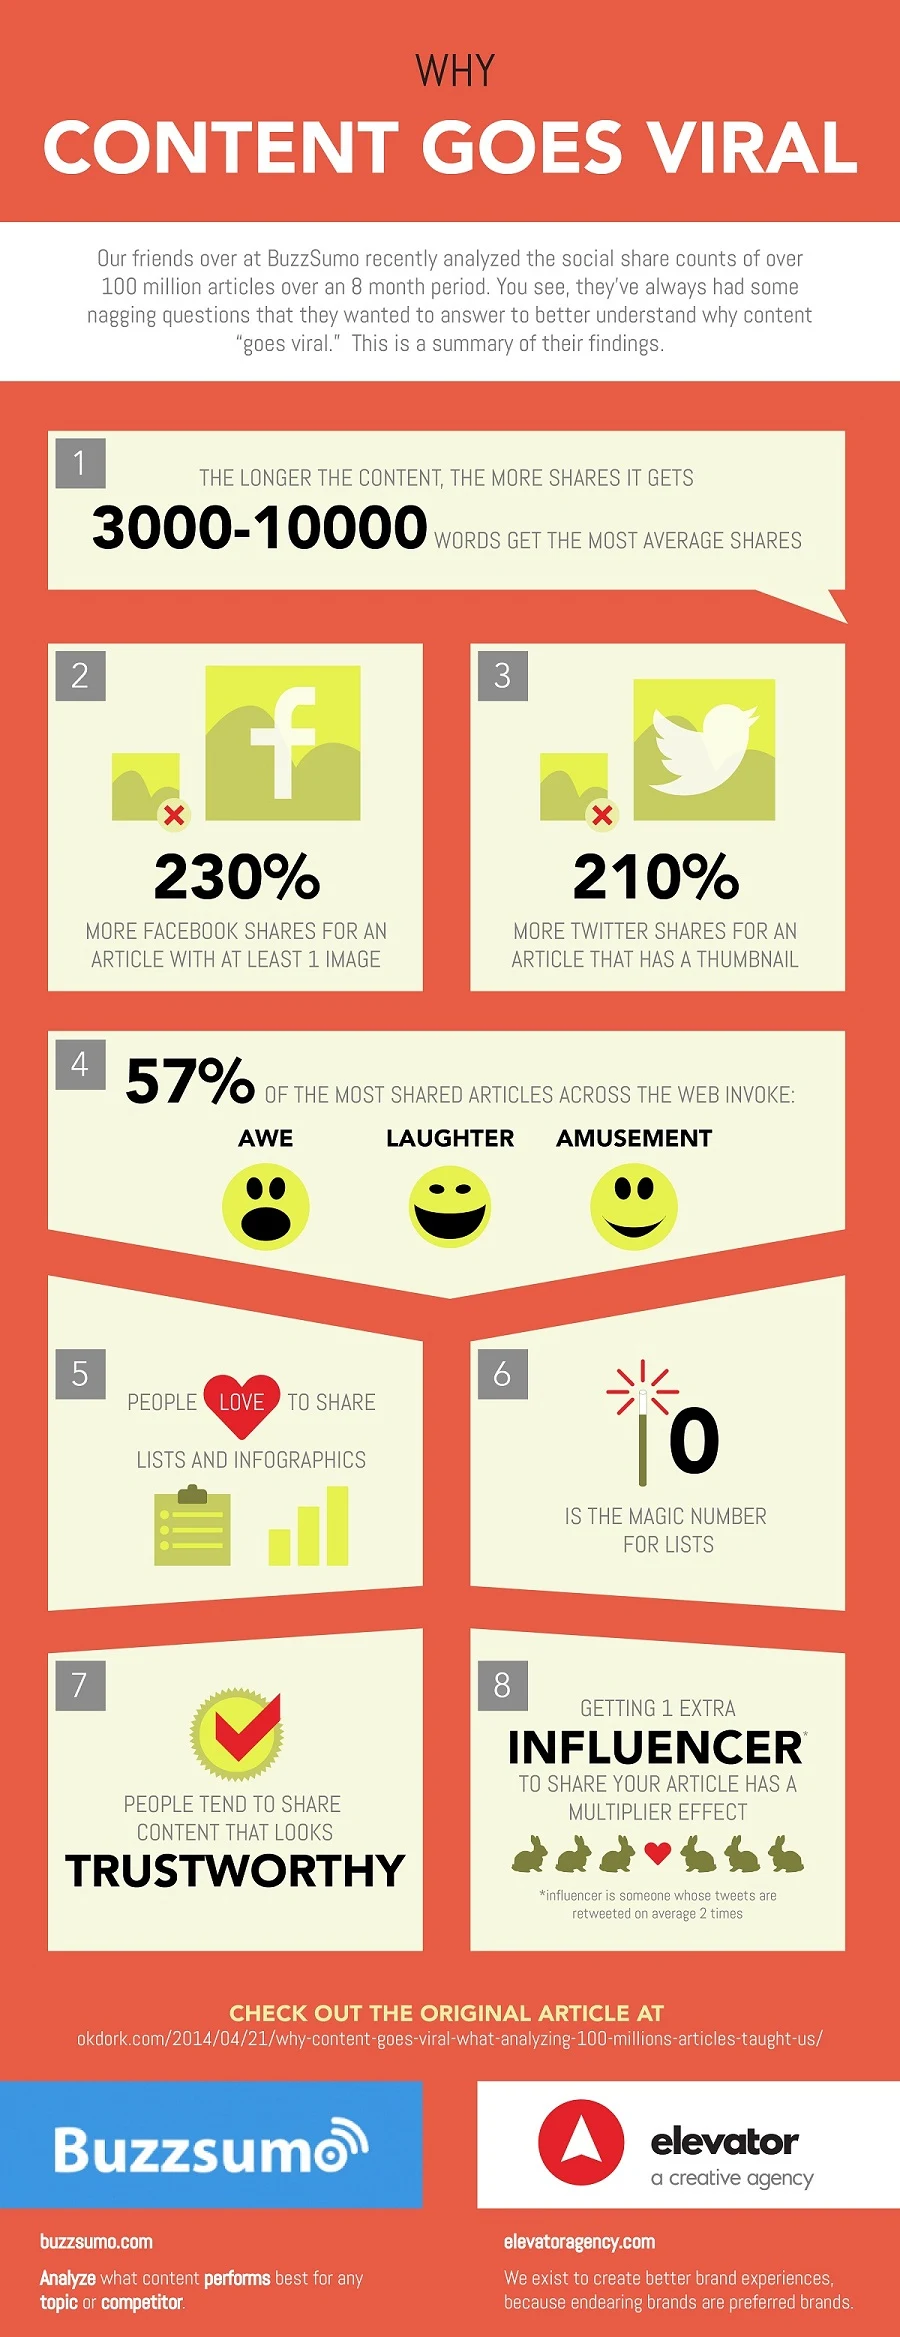 8 Reasons Why Content Goes Viral - infographic